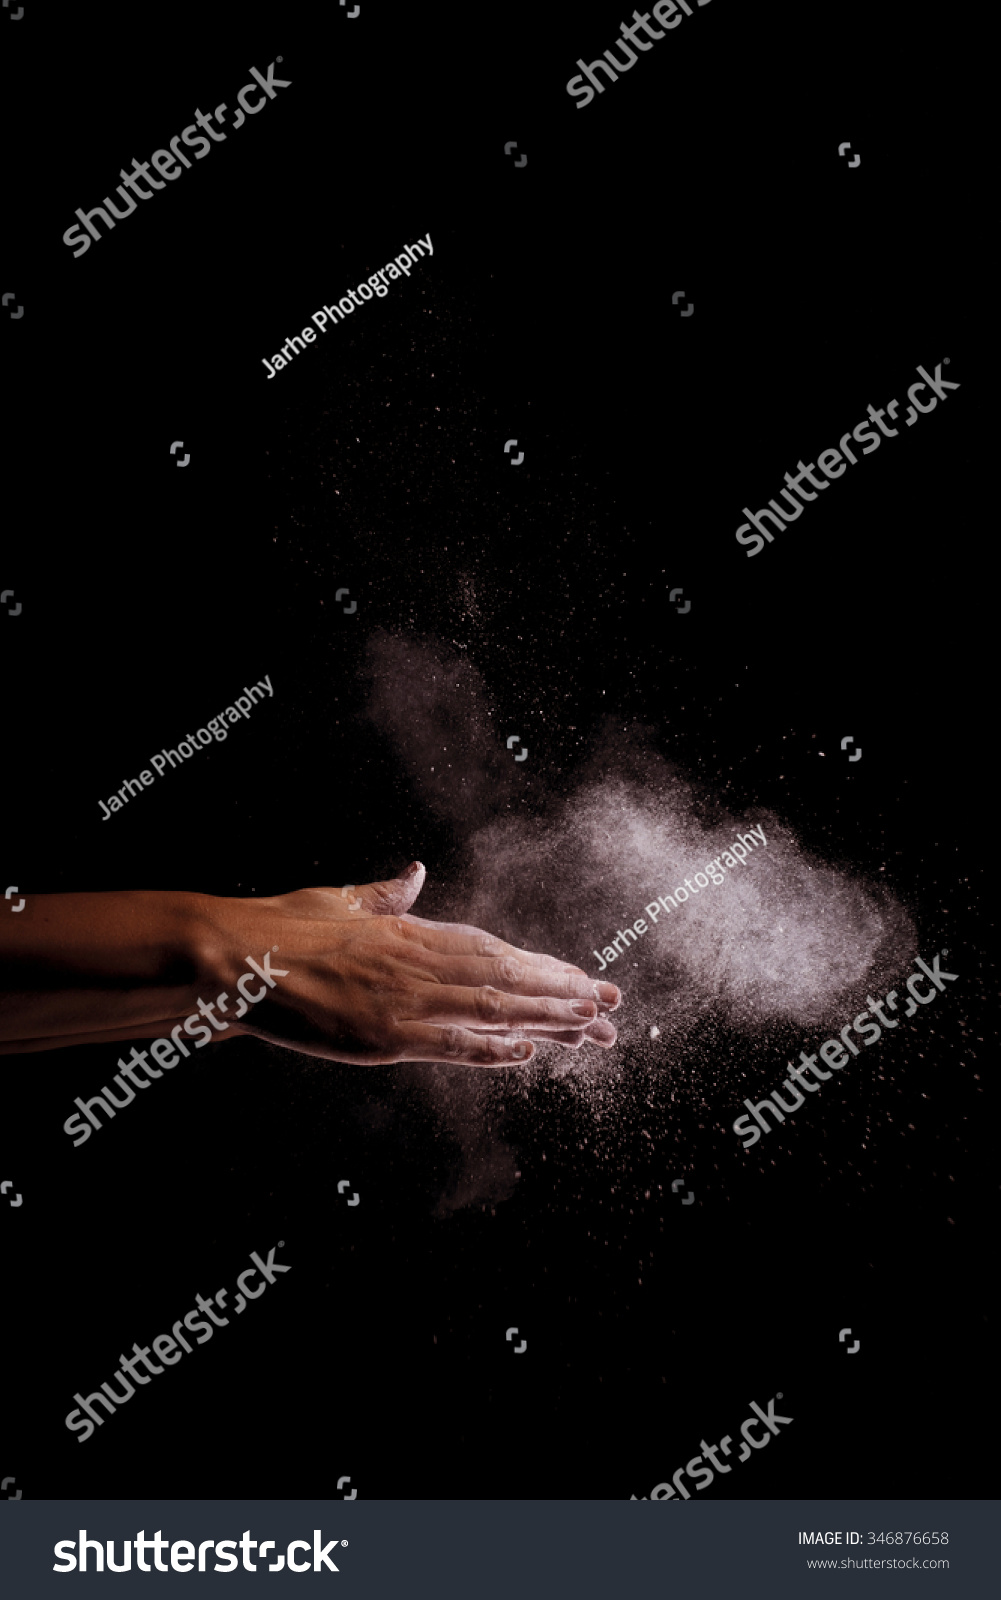 A woman beats her hands together, and white flour fly through the air. The shutter speed has been very fast. Image includes a effect. #346876658